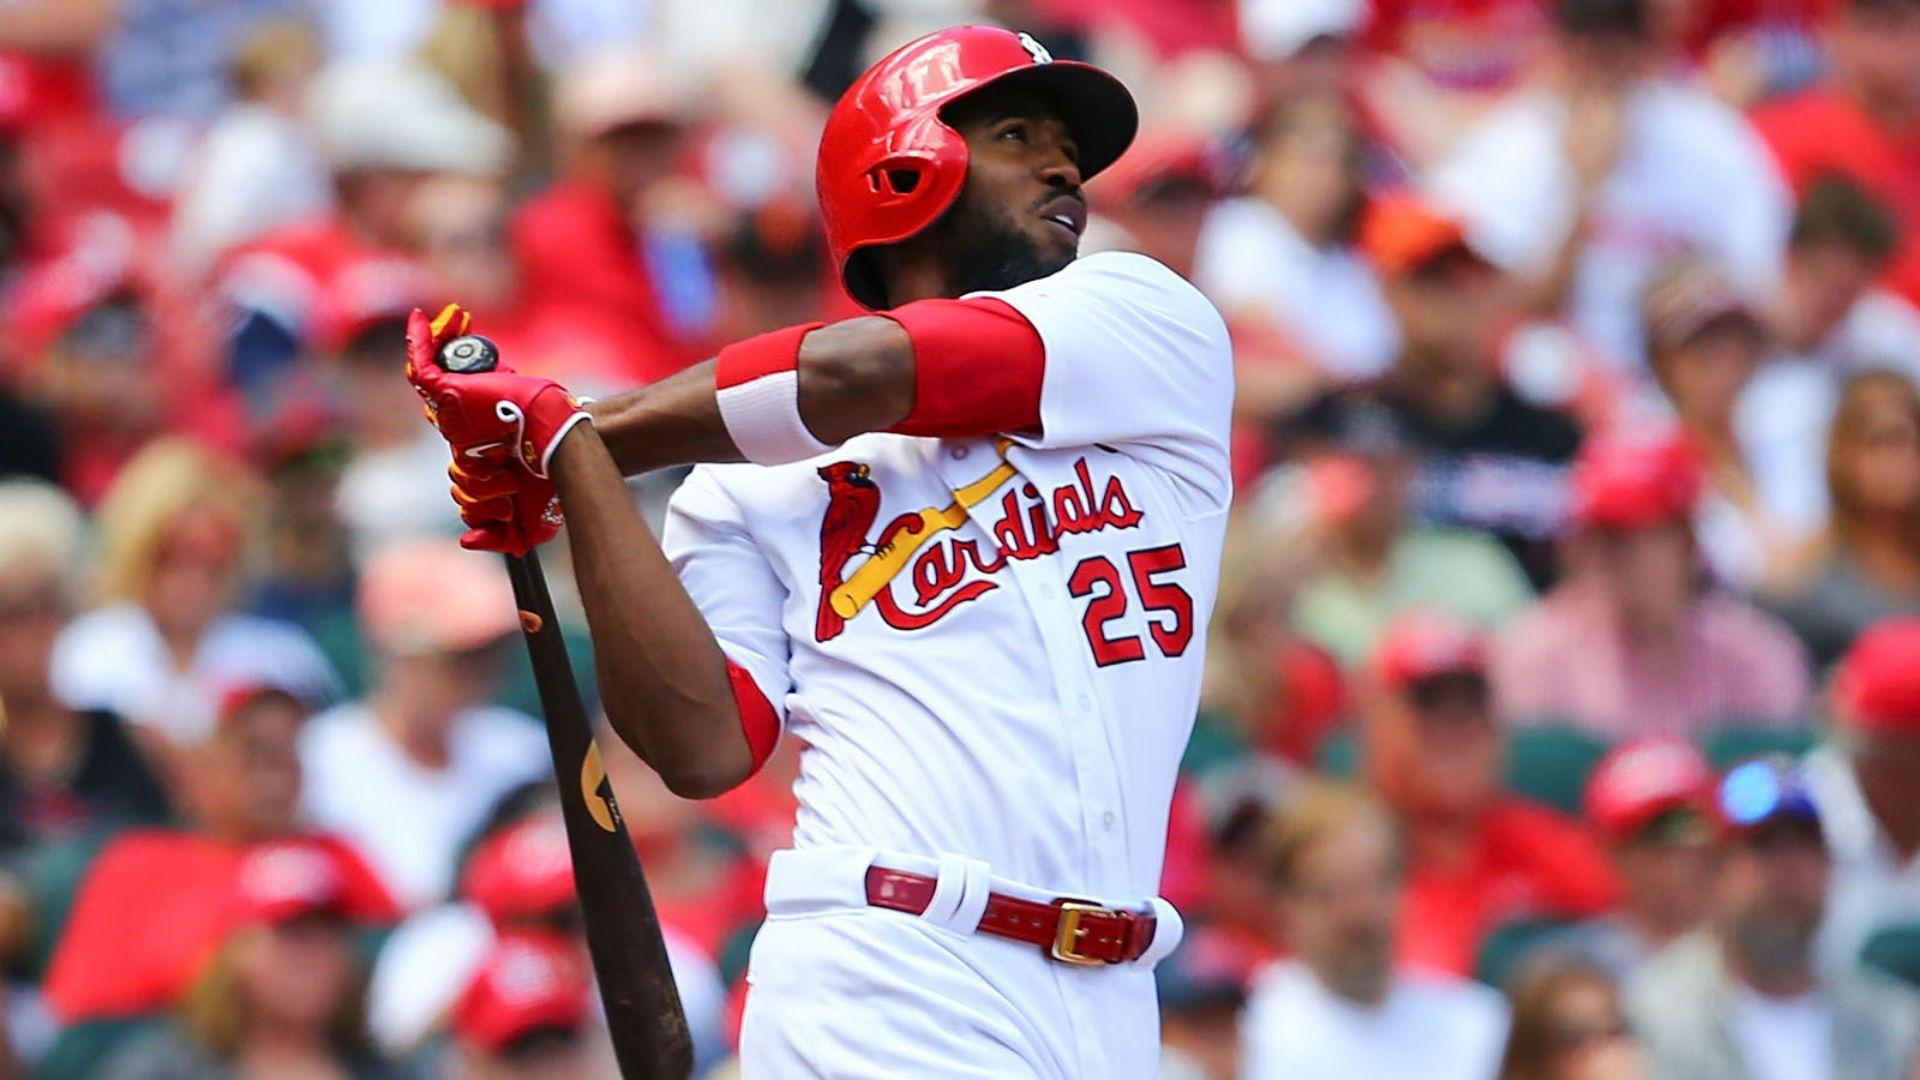 Cardinals Place Dexter Fowler On 10 Day DL, Recall Another Prospect